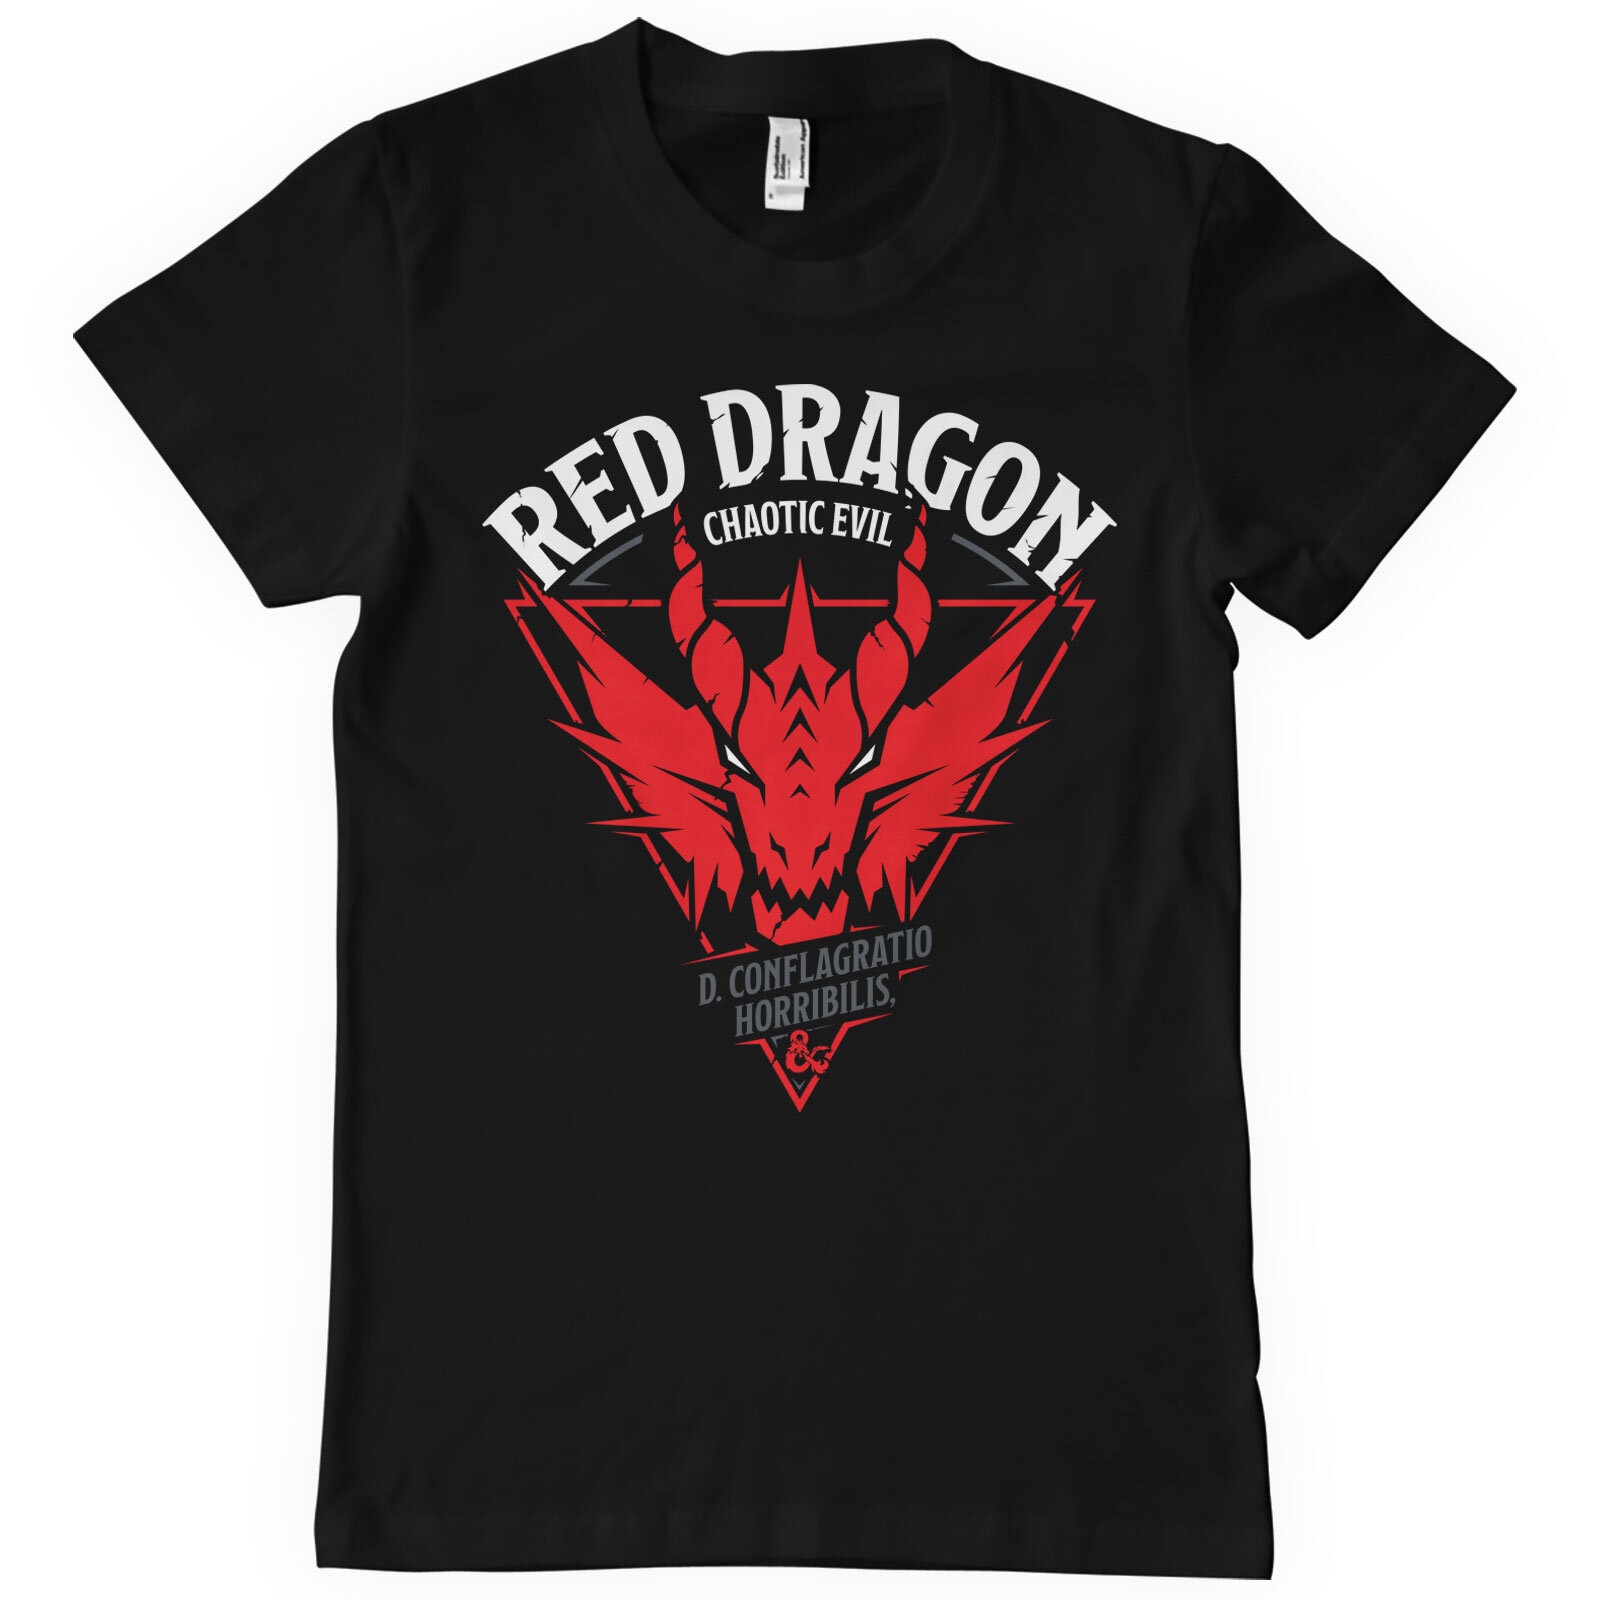 Red Dragon - Chaotic Evil T-Shirt